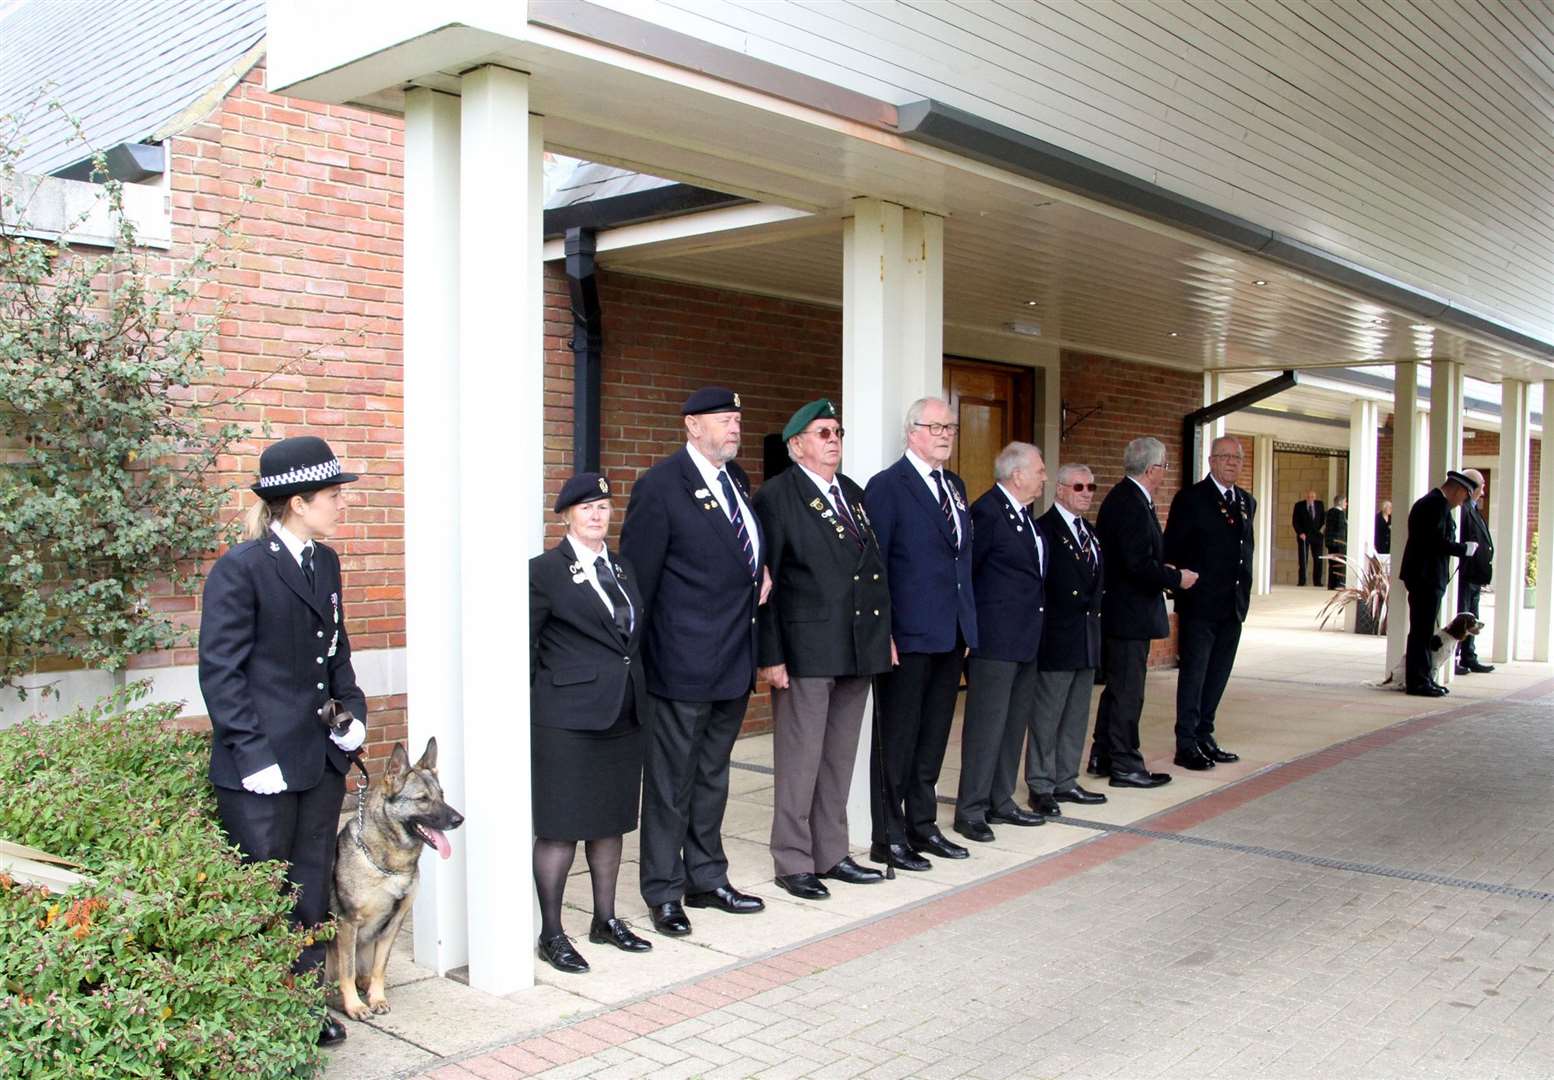 A Guard of Honour from the Kent Police Dog Unit and members of the Royal Navy Ass for Mick Bingham's Funeral on arrival at the Garden of England Crematorium, in Bobbing. Picture: Roger Vaughan